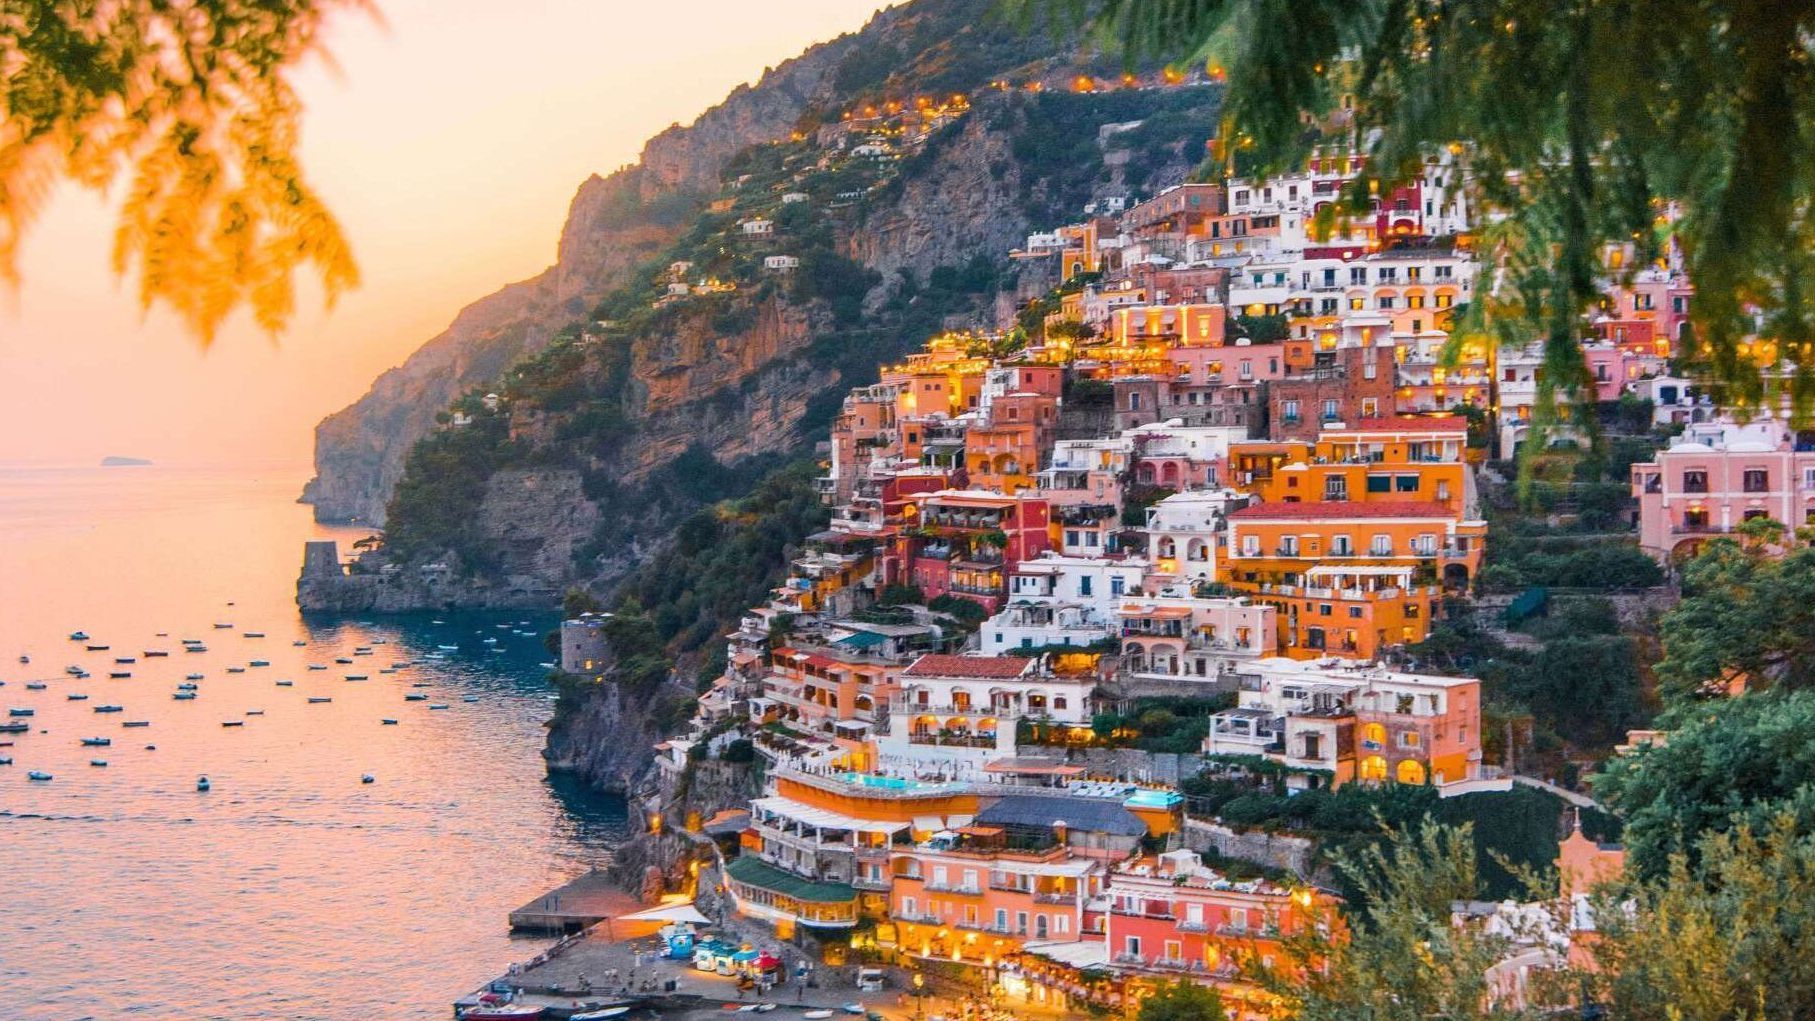 A small town on a cliff overlooking the ocean at sunset.